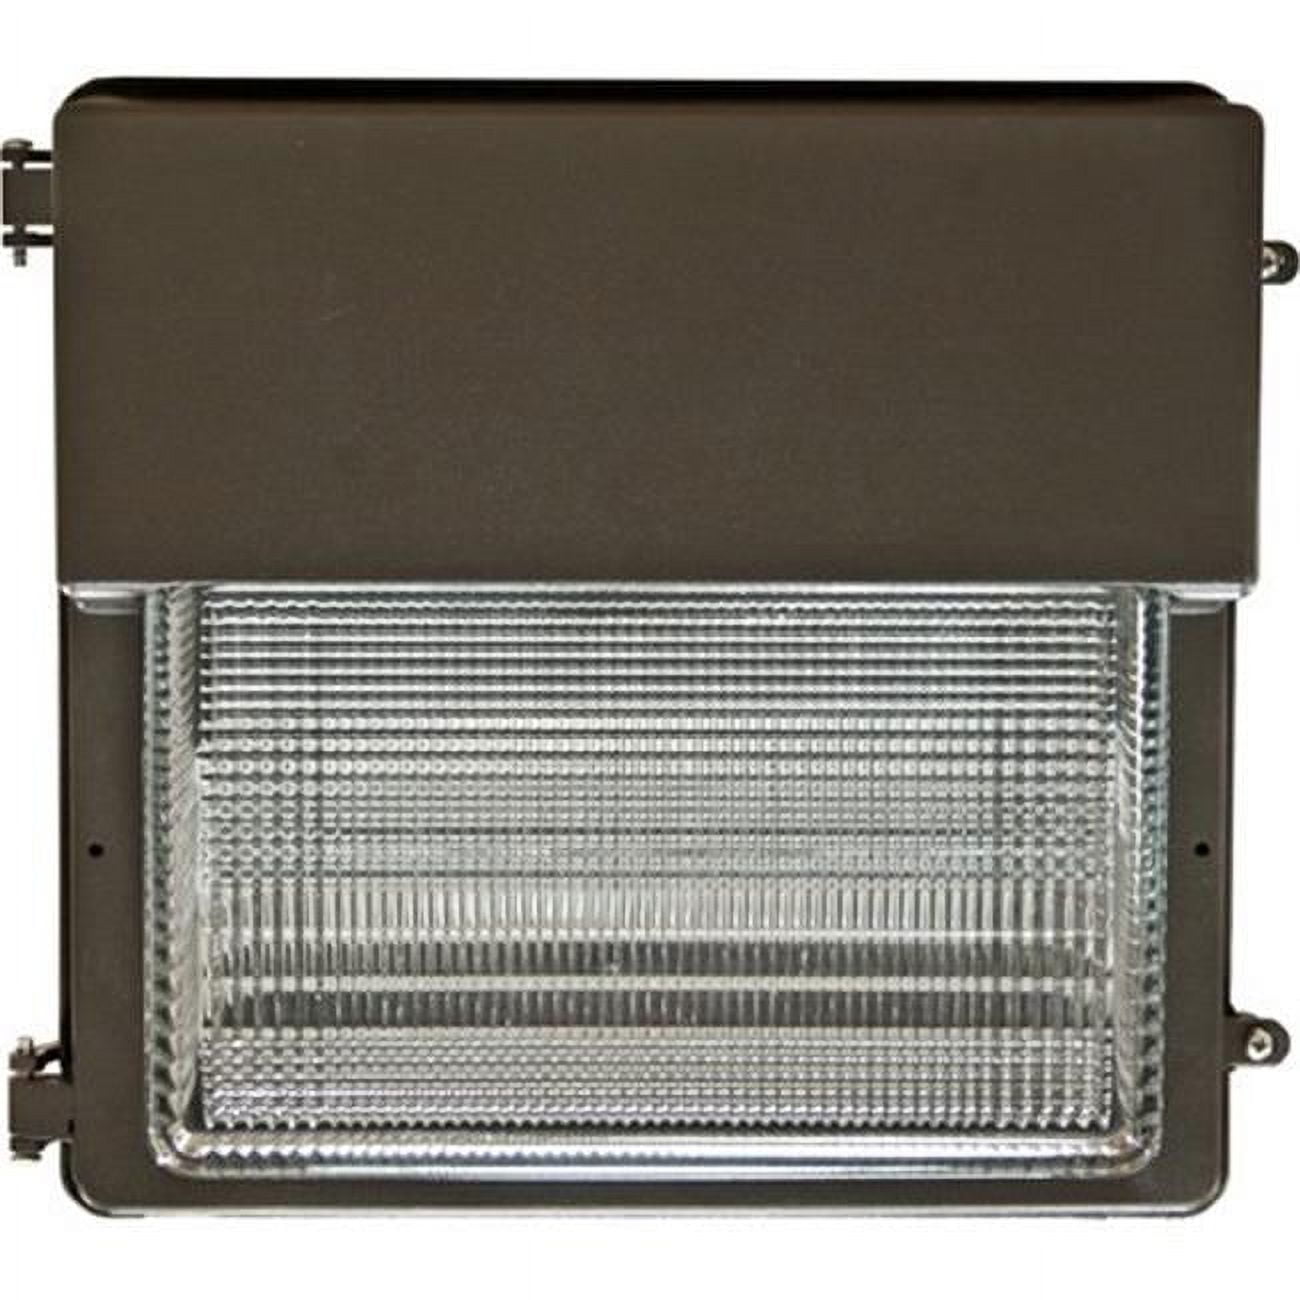 Dw1852-mt 14.75 X 15 X 9.88 In. 250 Watts Large Wall Pack Fixture With Metal Halide Lamp, Bronze